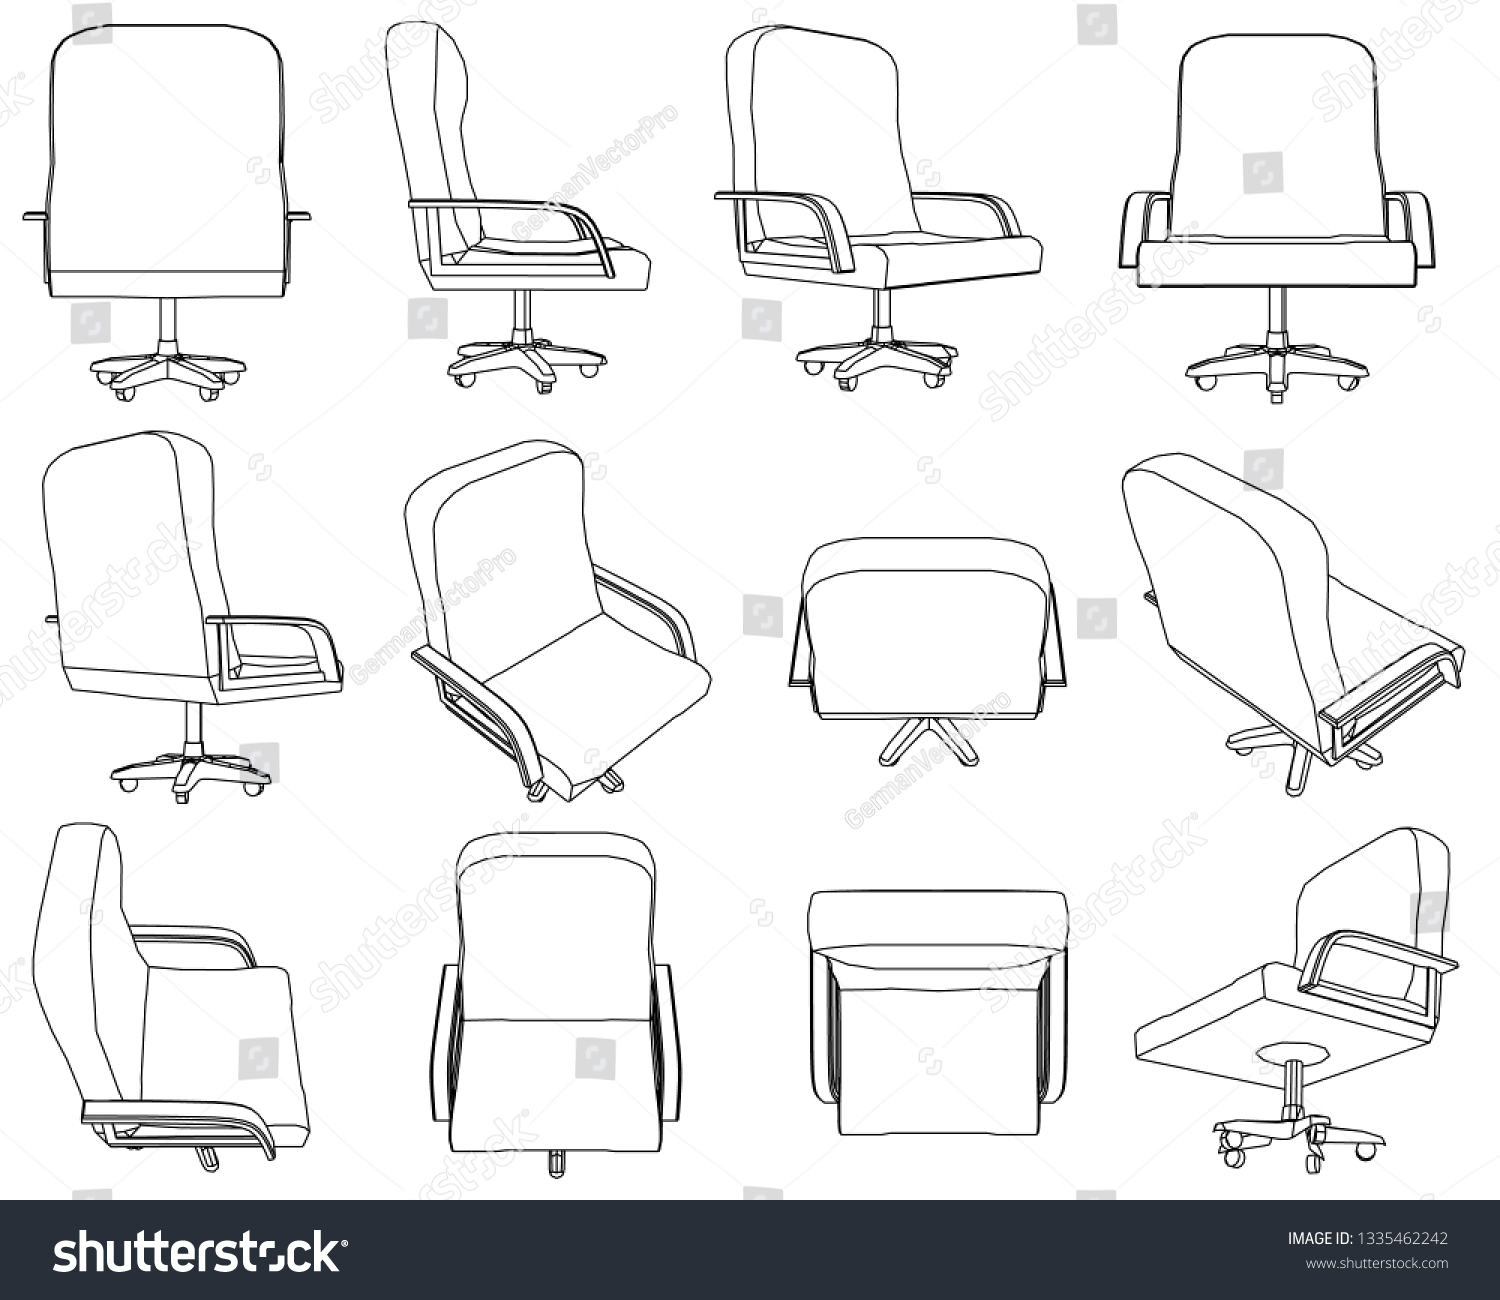 Set Contours Office Chairs Office Chair Stock Vector Royalty Free 1335462242